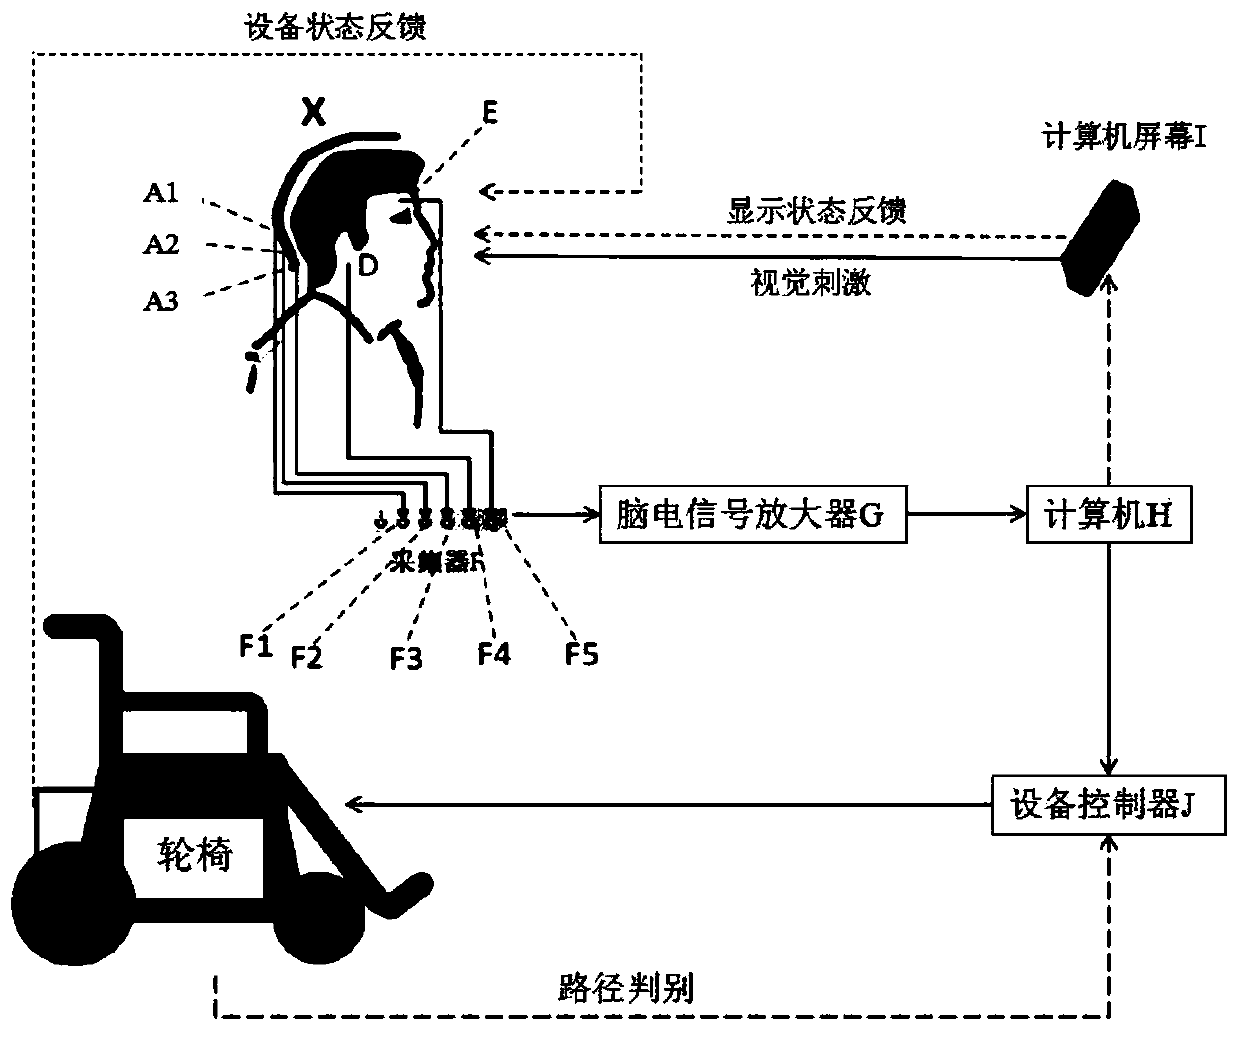 Intelligent wheelchair control and path optimization method based on visually induced brain-computer interface